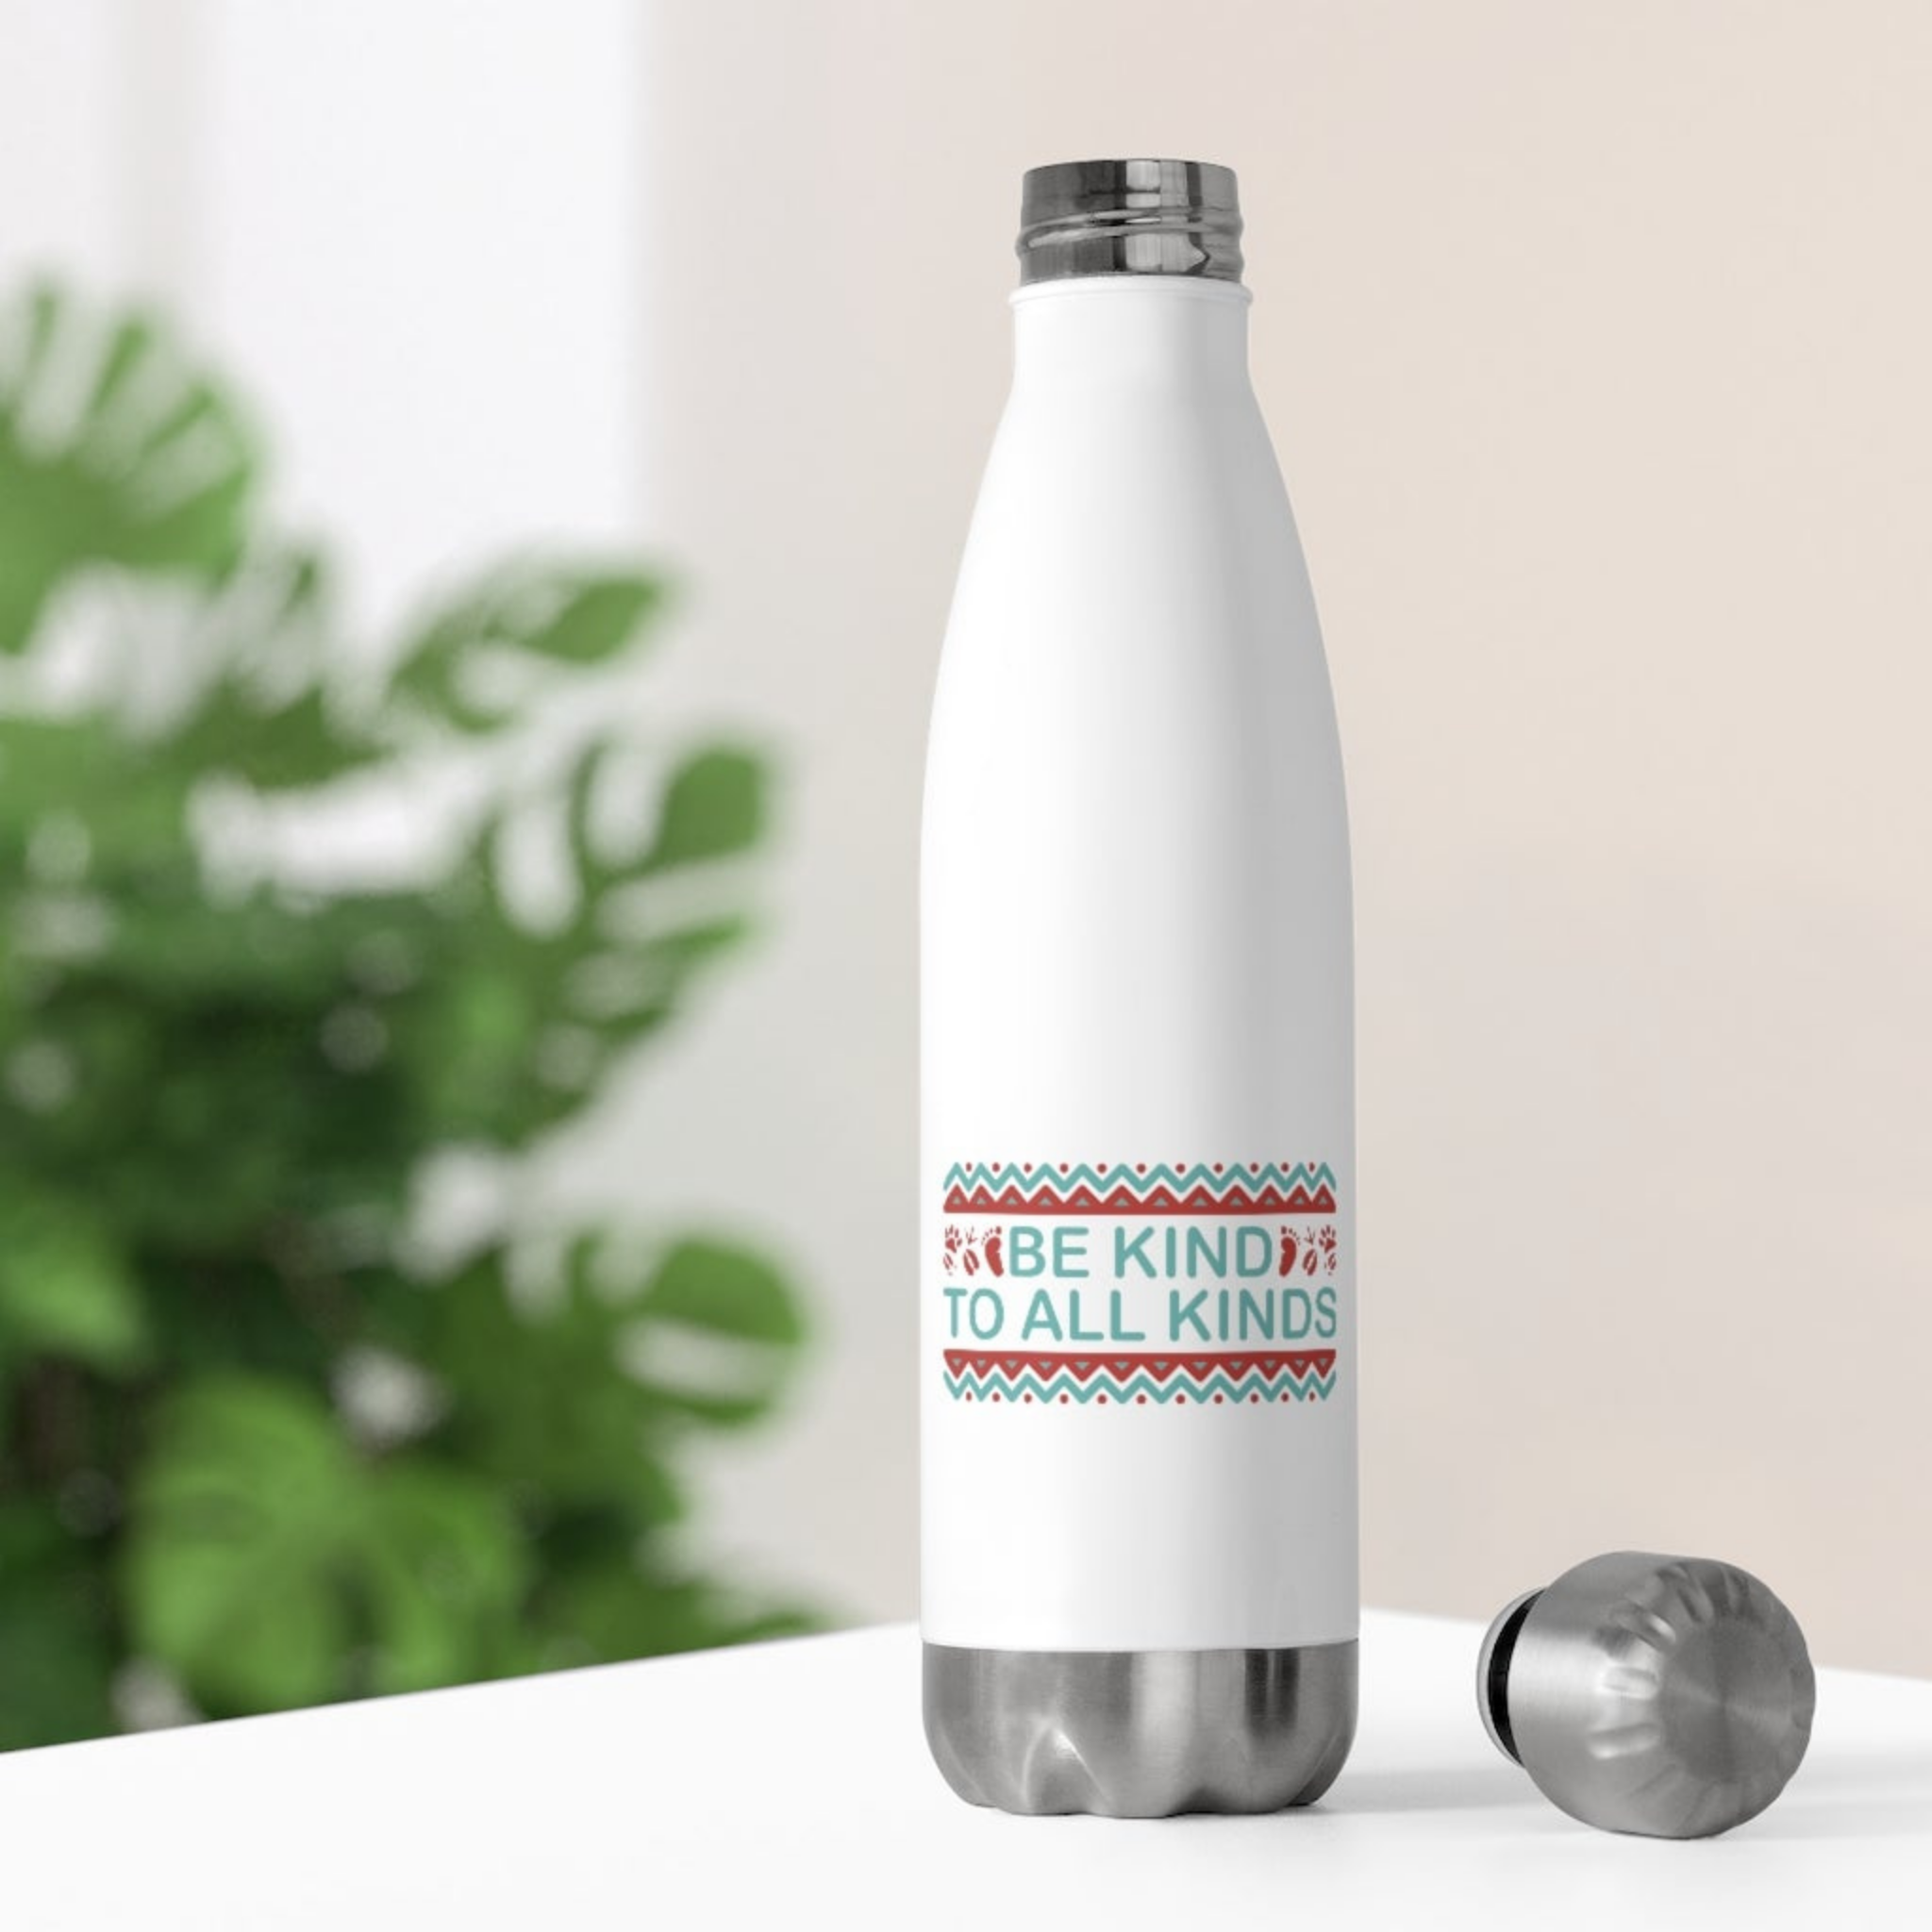 eco friendly water bottles saying be kind to all kinds to go with vegan clothing from companies that donate to nonprofits